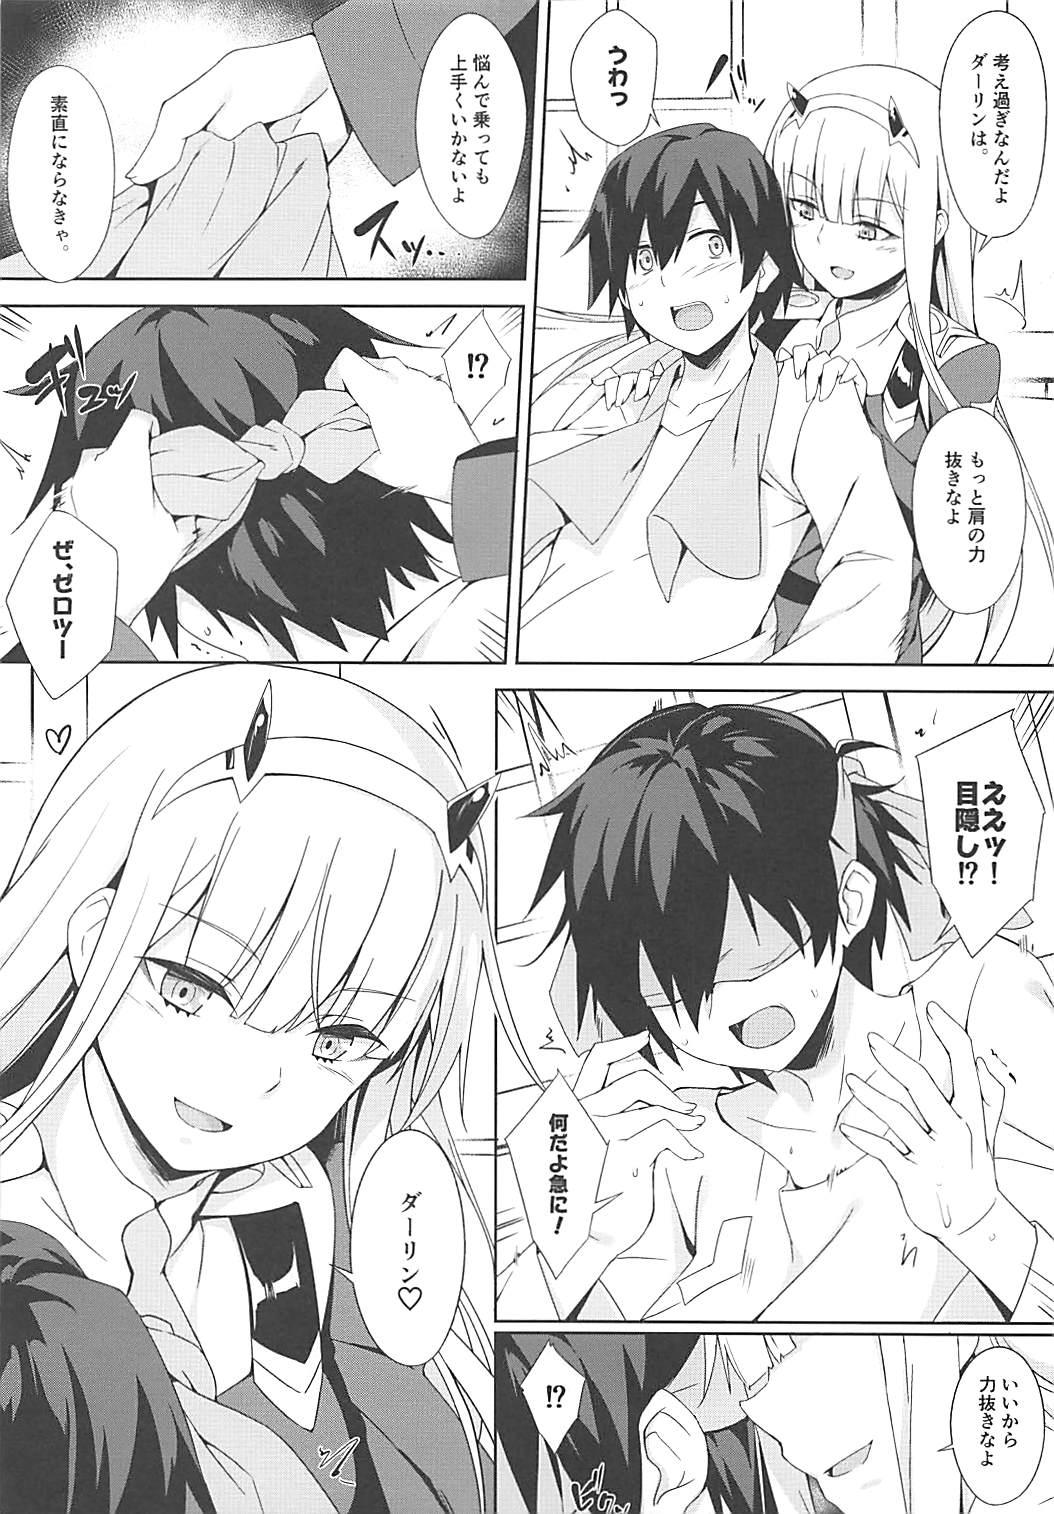 Friend Darling Escort - Darling in the franxx Abuse - Page 5